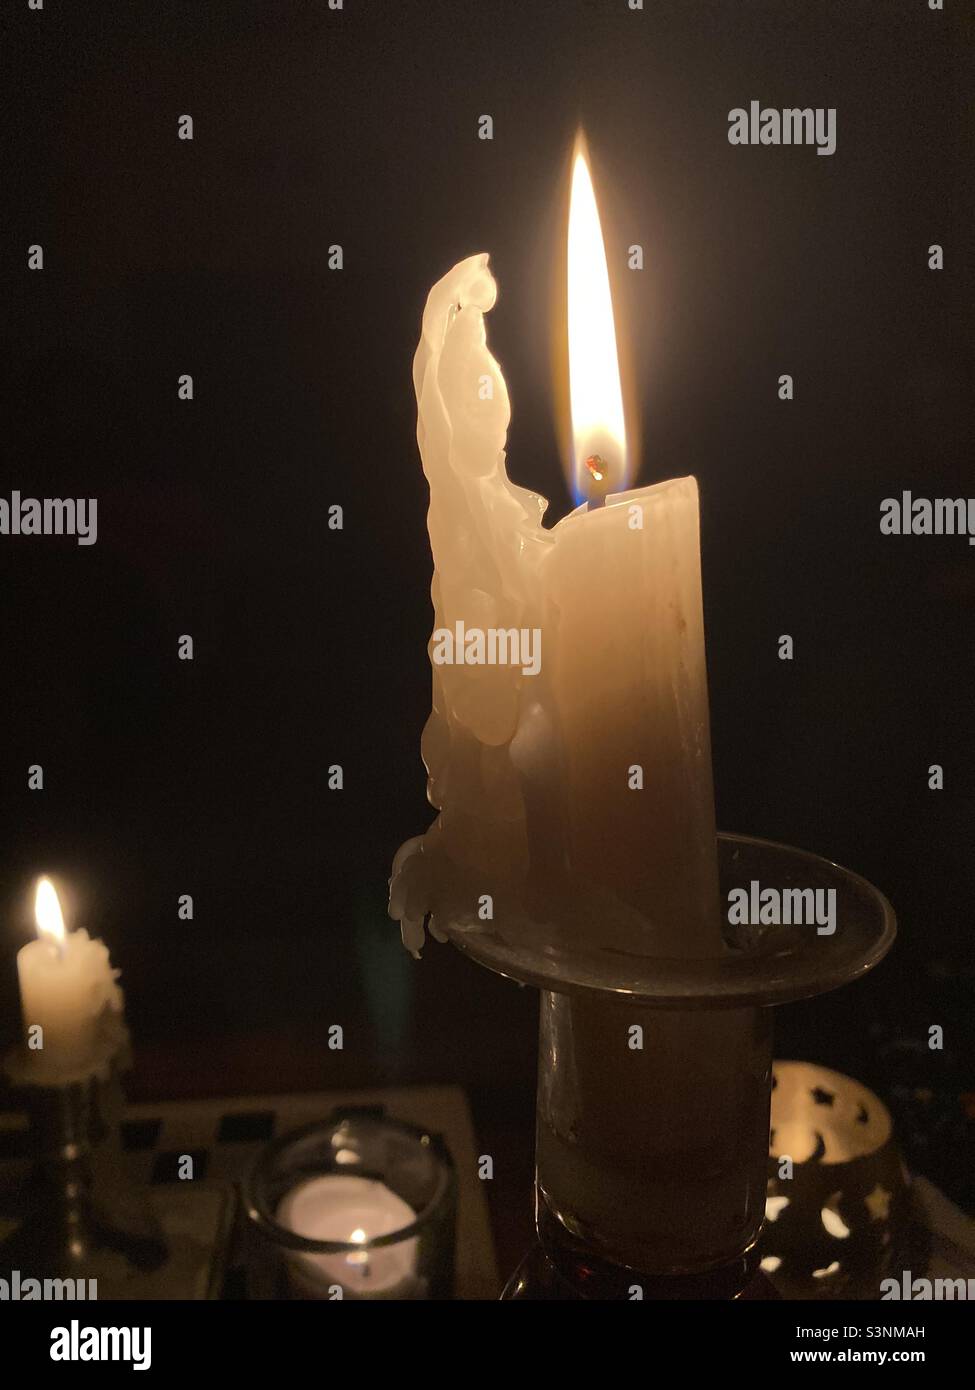 https://c8.alamy.com/comp/S3NMAH/candlelight-during-a-power-cut-S3NMAH.jpg